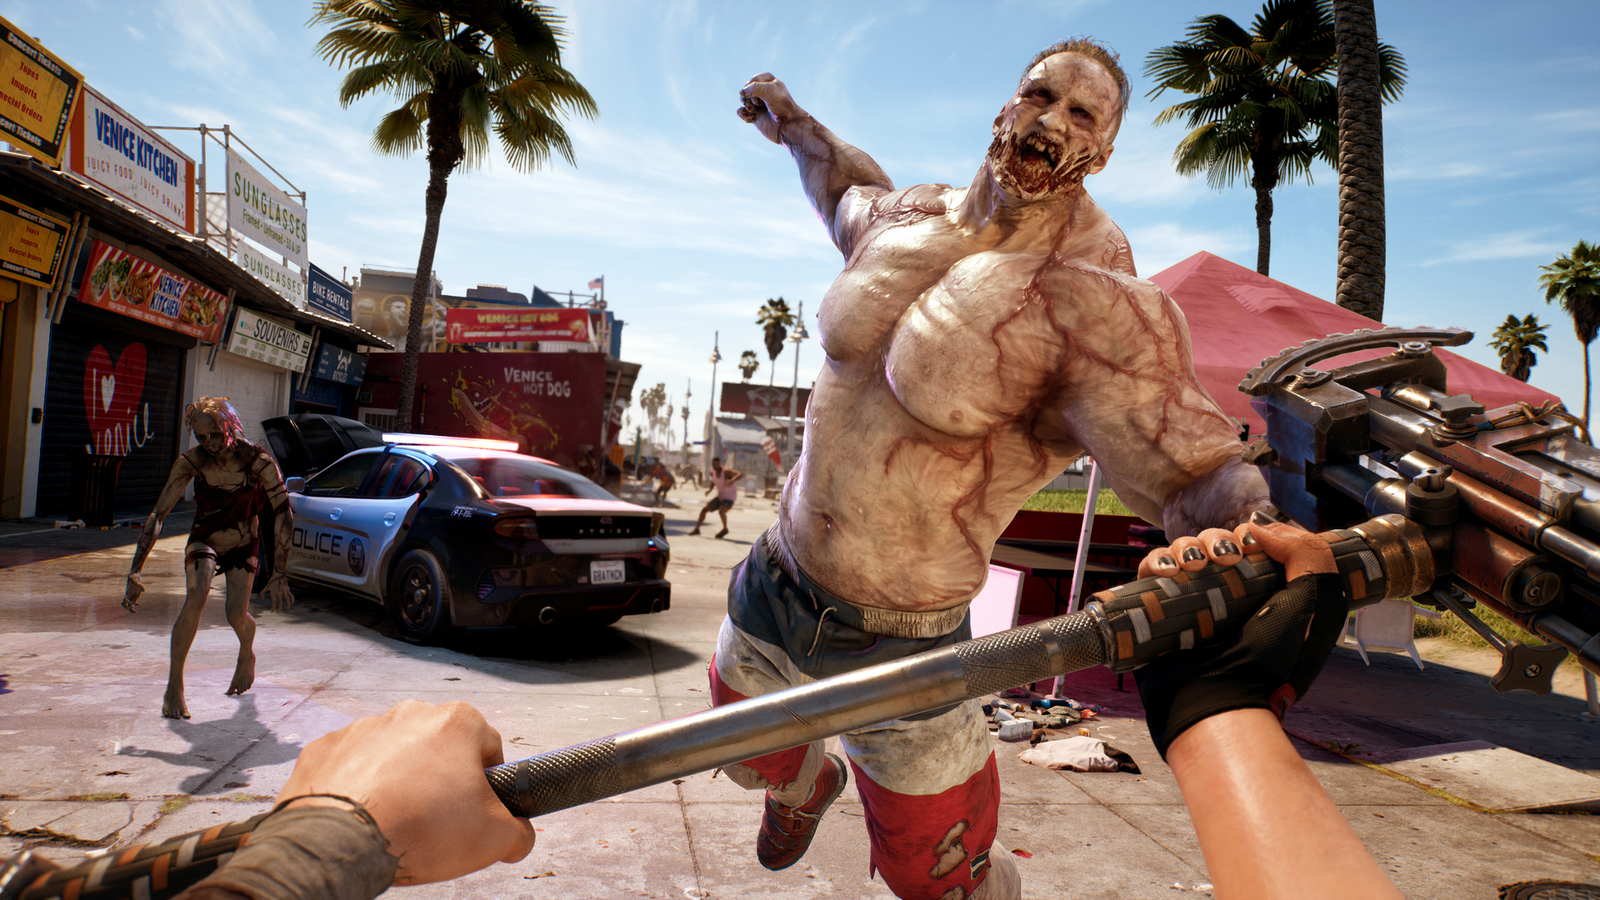 Dead Island 2: Haus - Rites of Passages locations and solutions